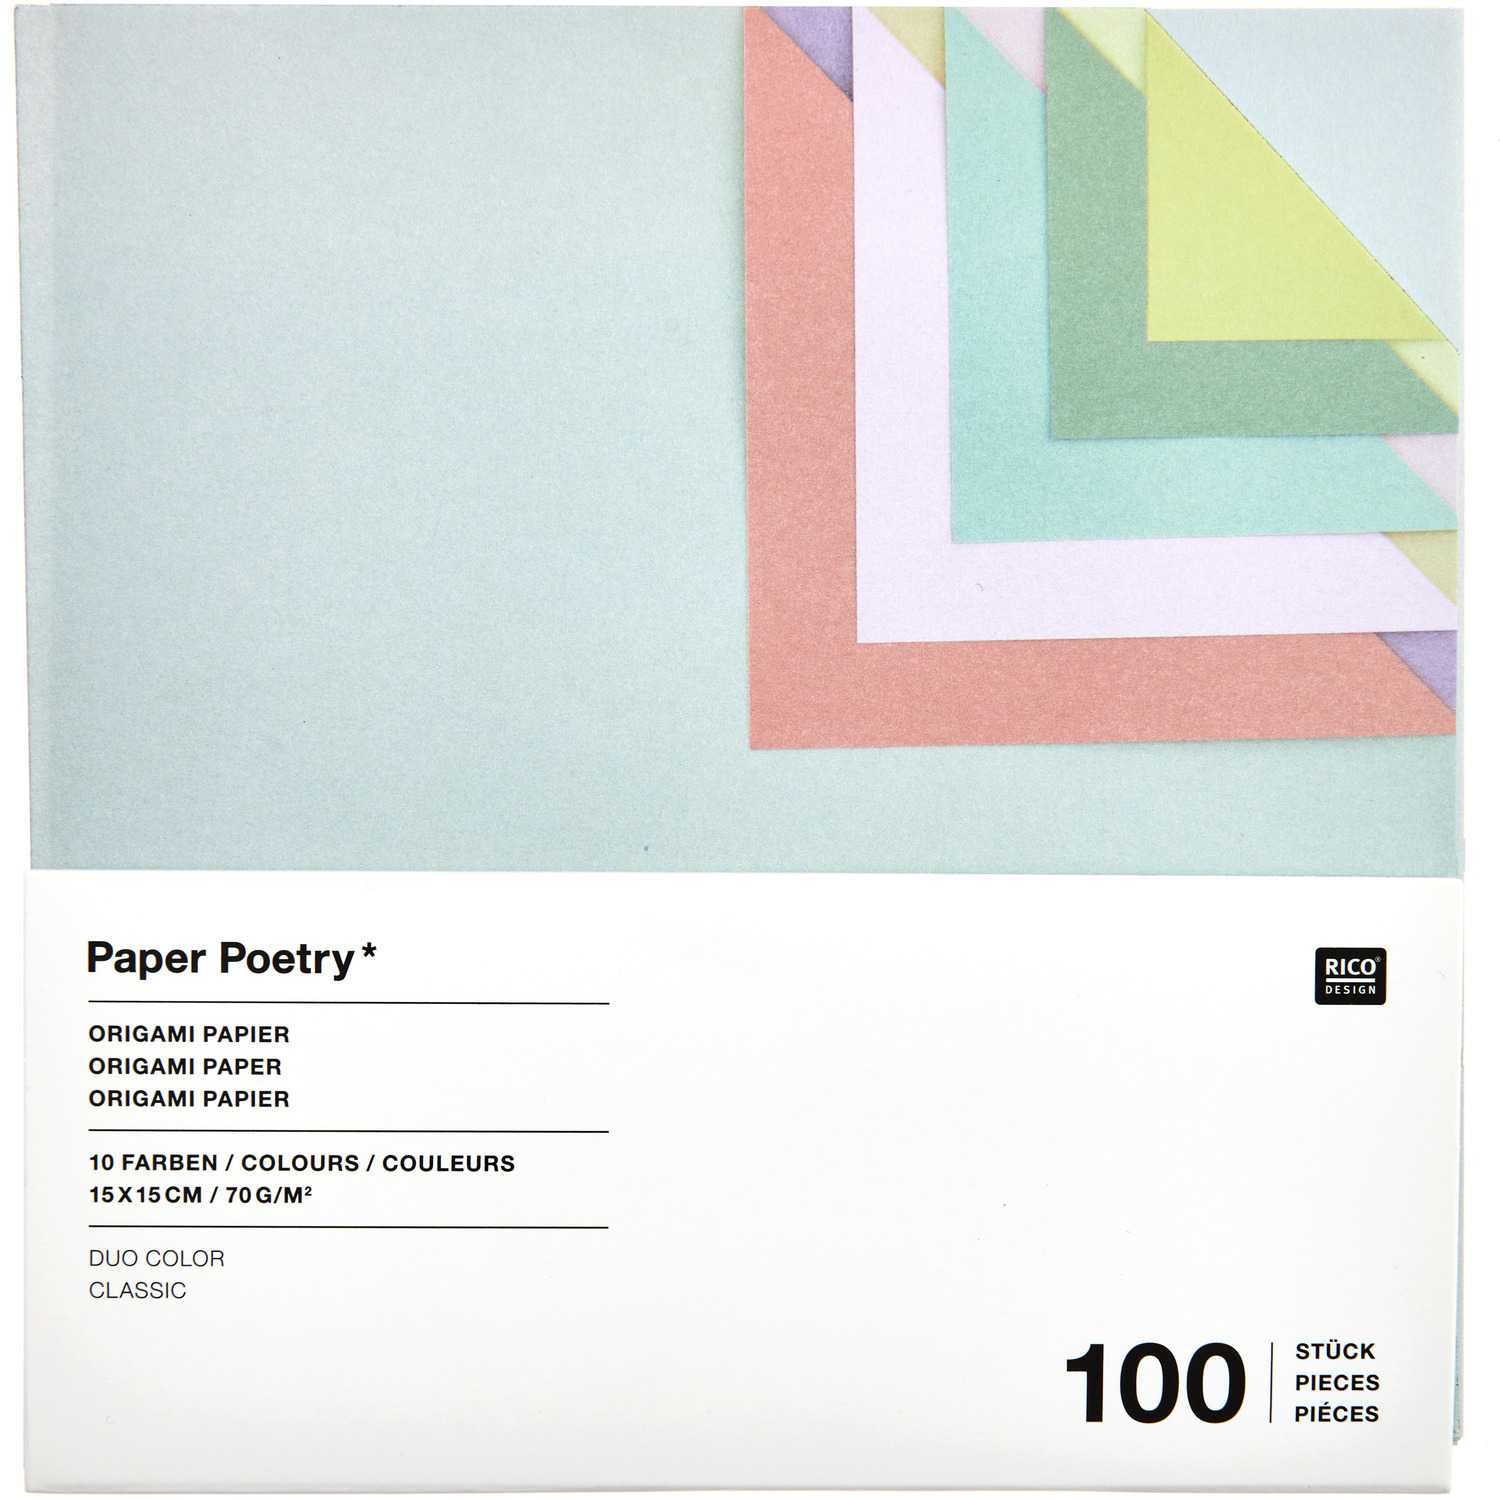 Paper Poetry Origami Duo color Classic